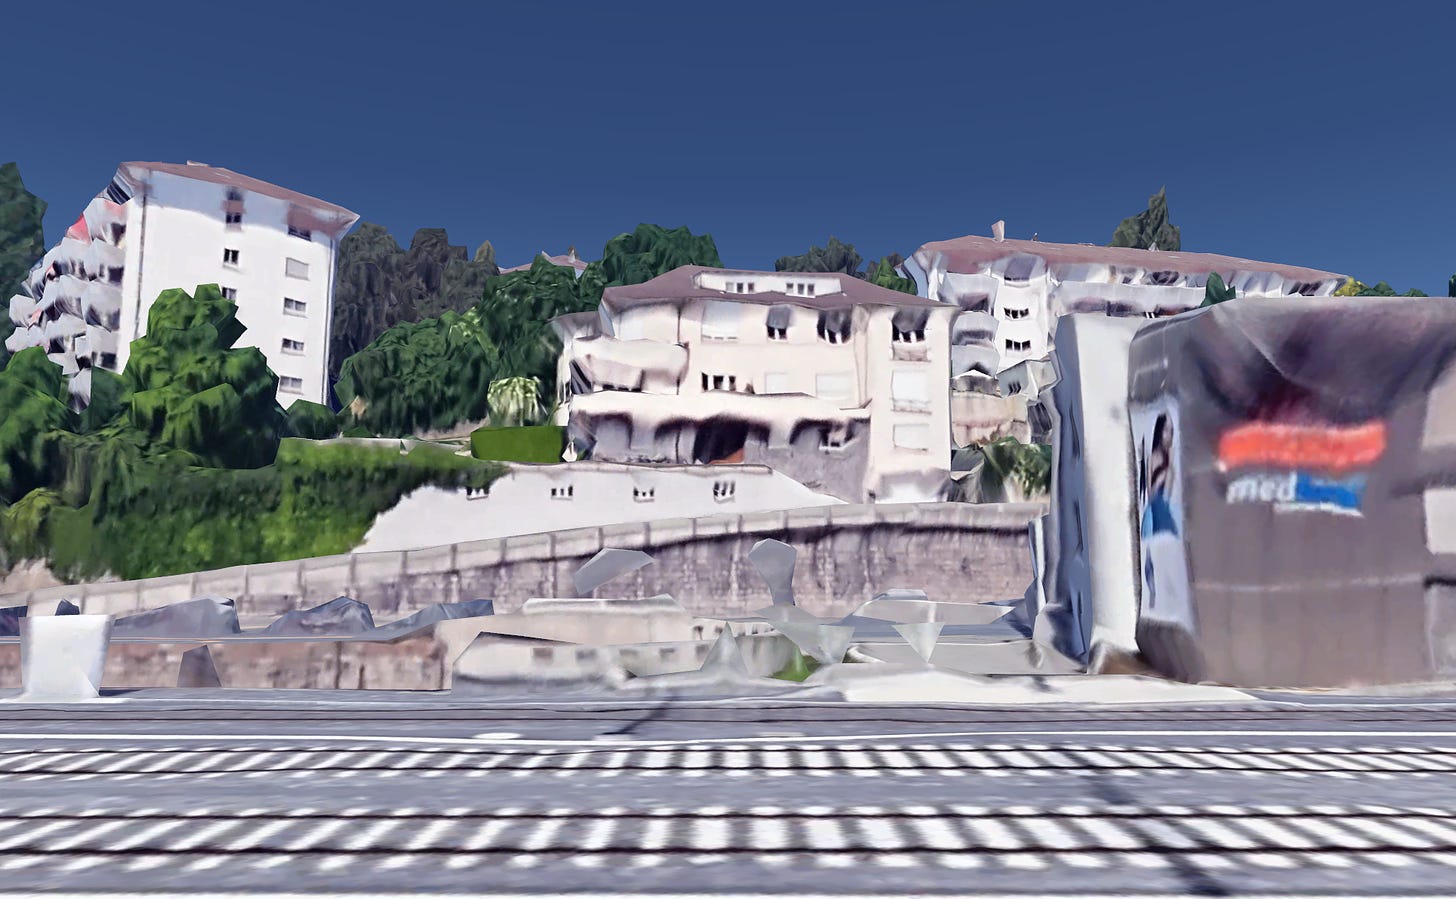 A Google Earth screenshot showing the candidate house from maia's proposed location.